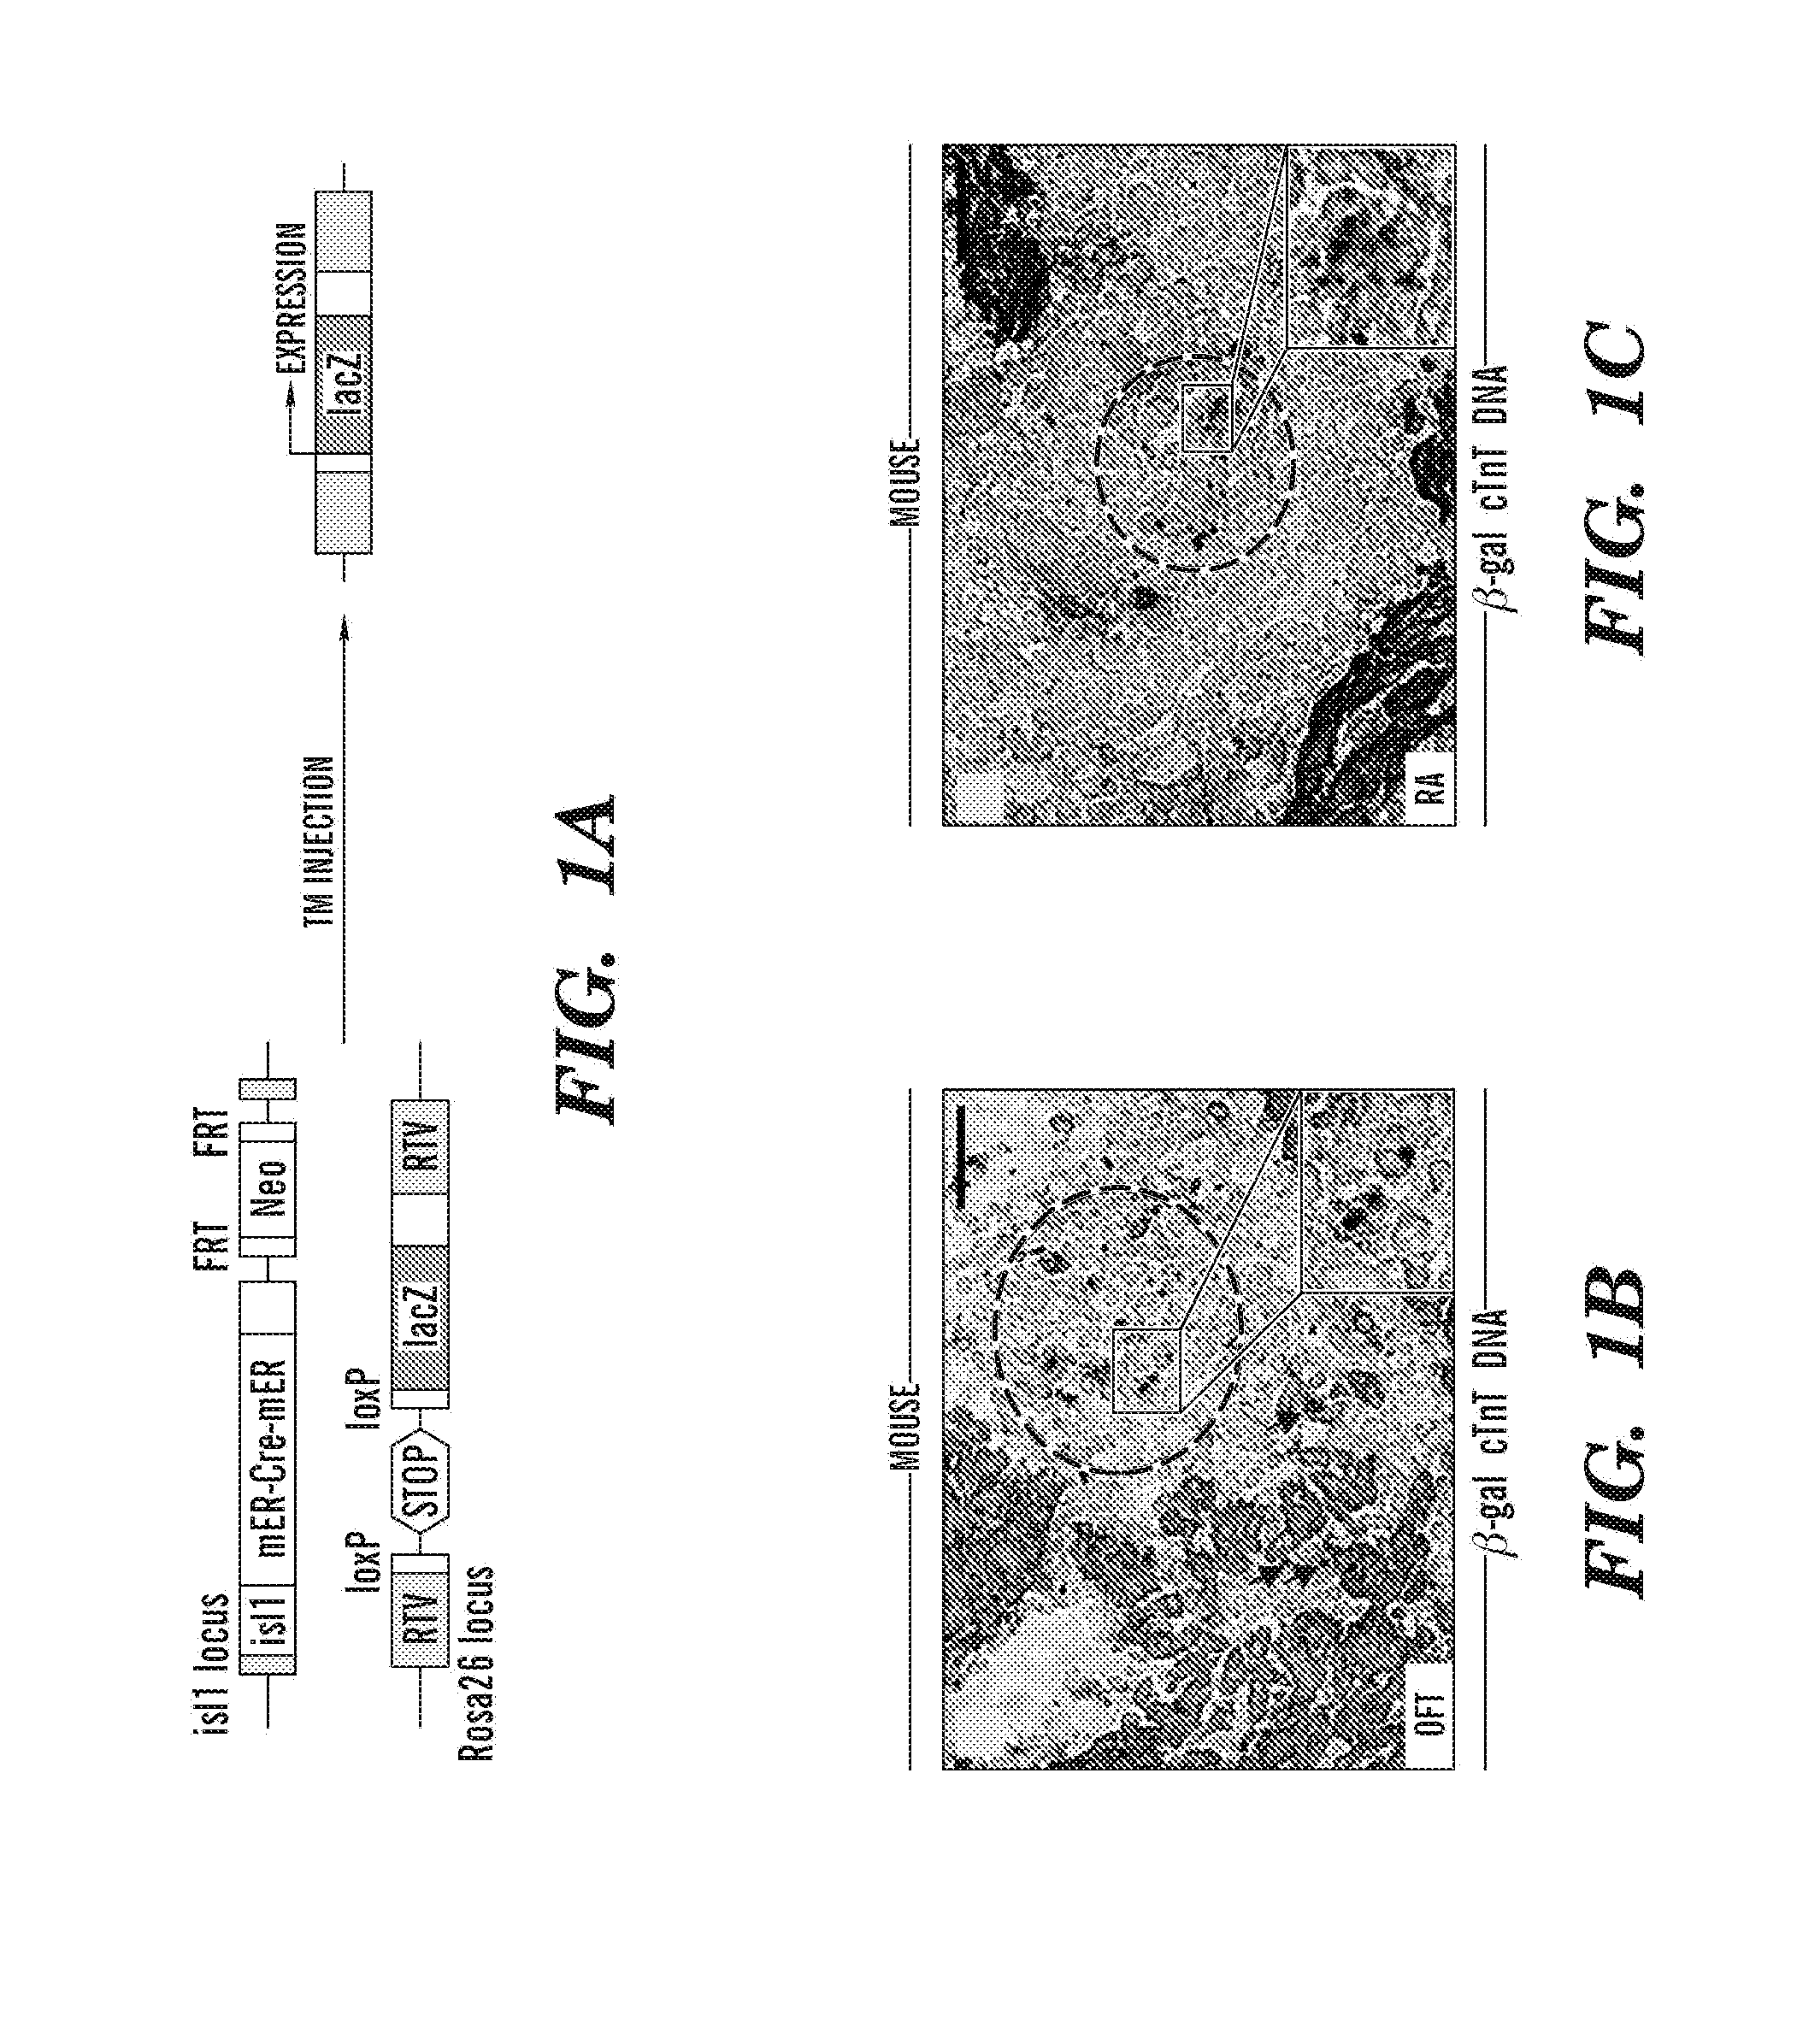 Methods for the induction of a cell to enter the islet 1+ lineage and a method for the expansion thereof